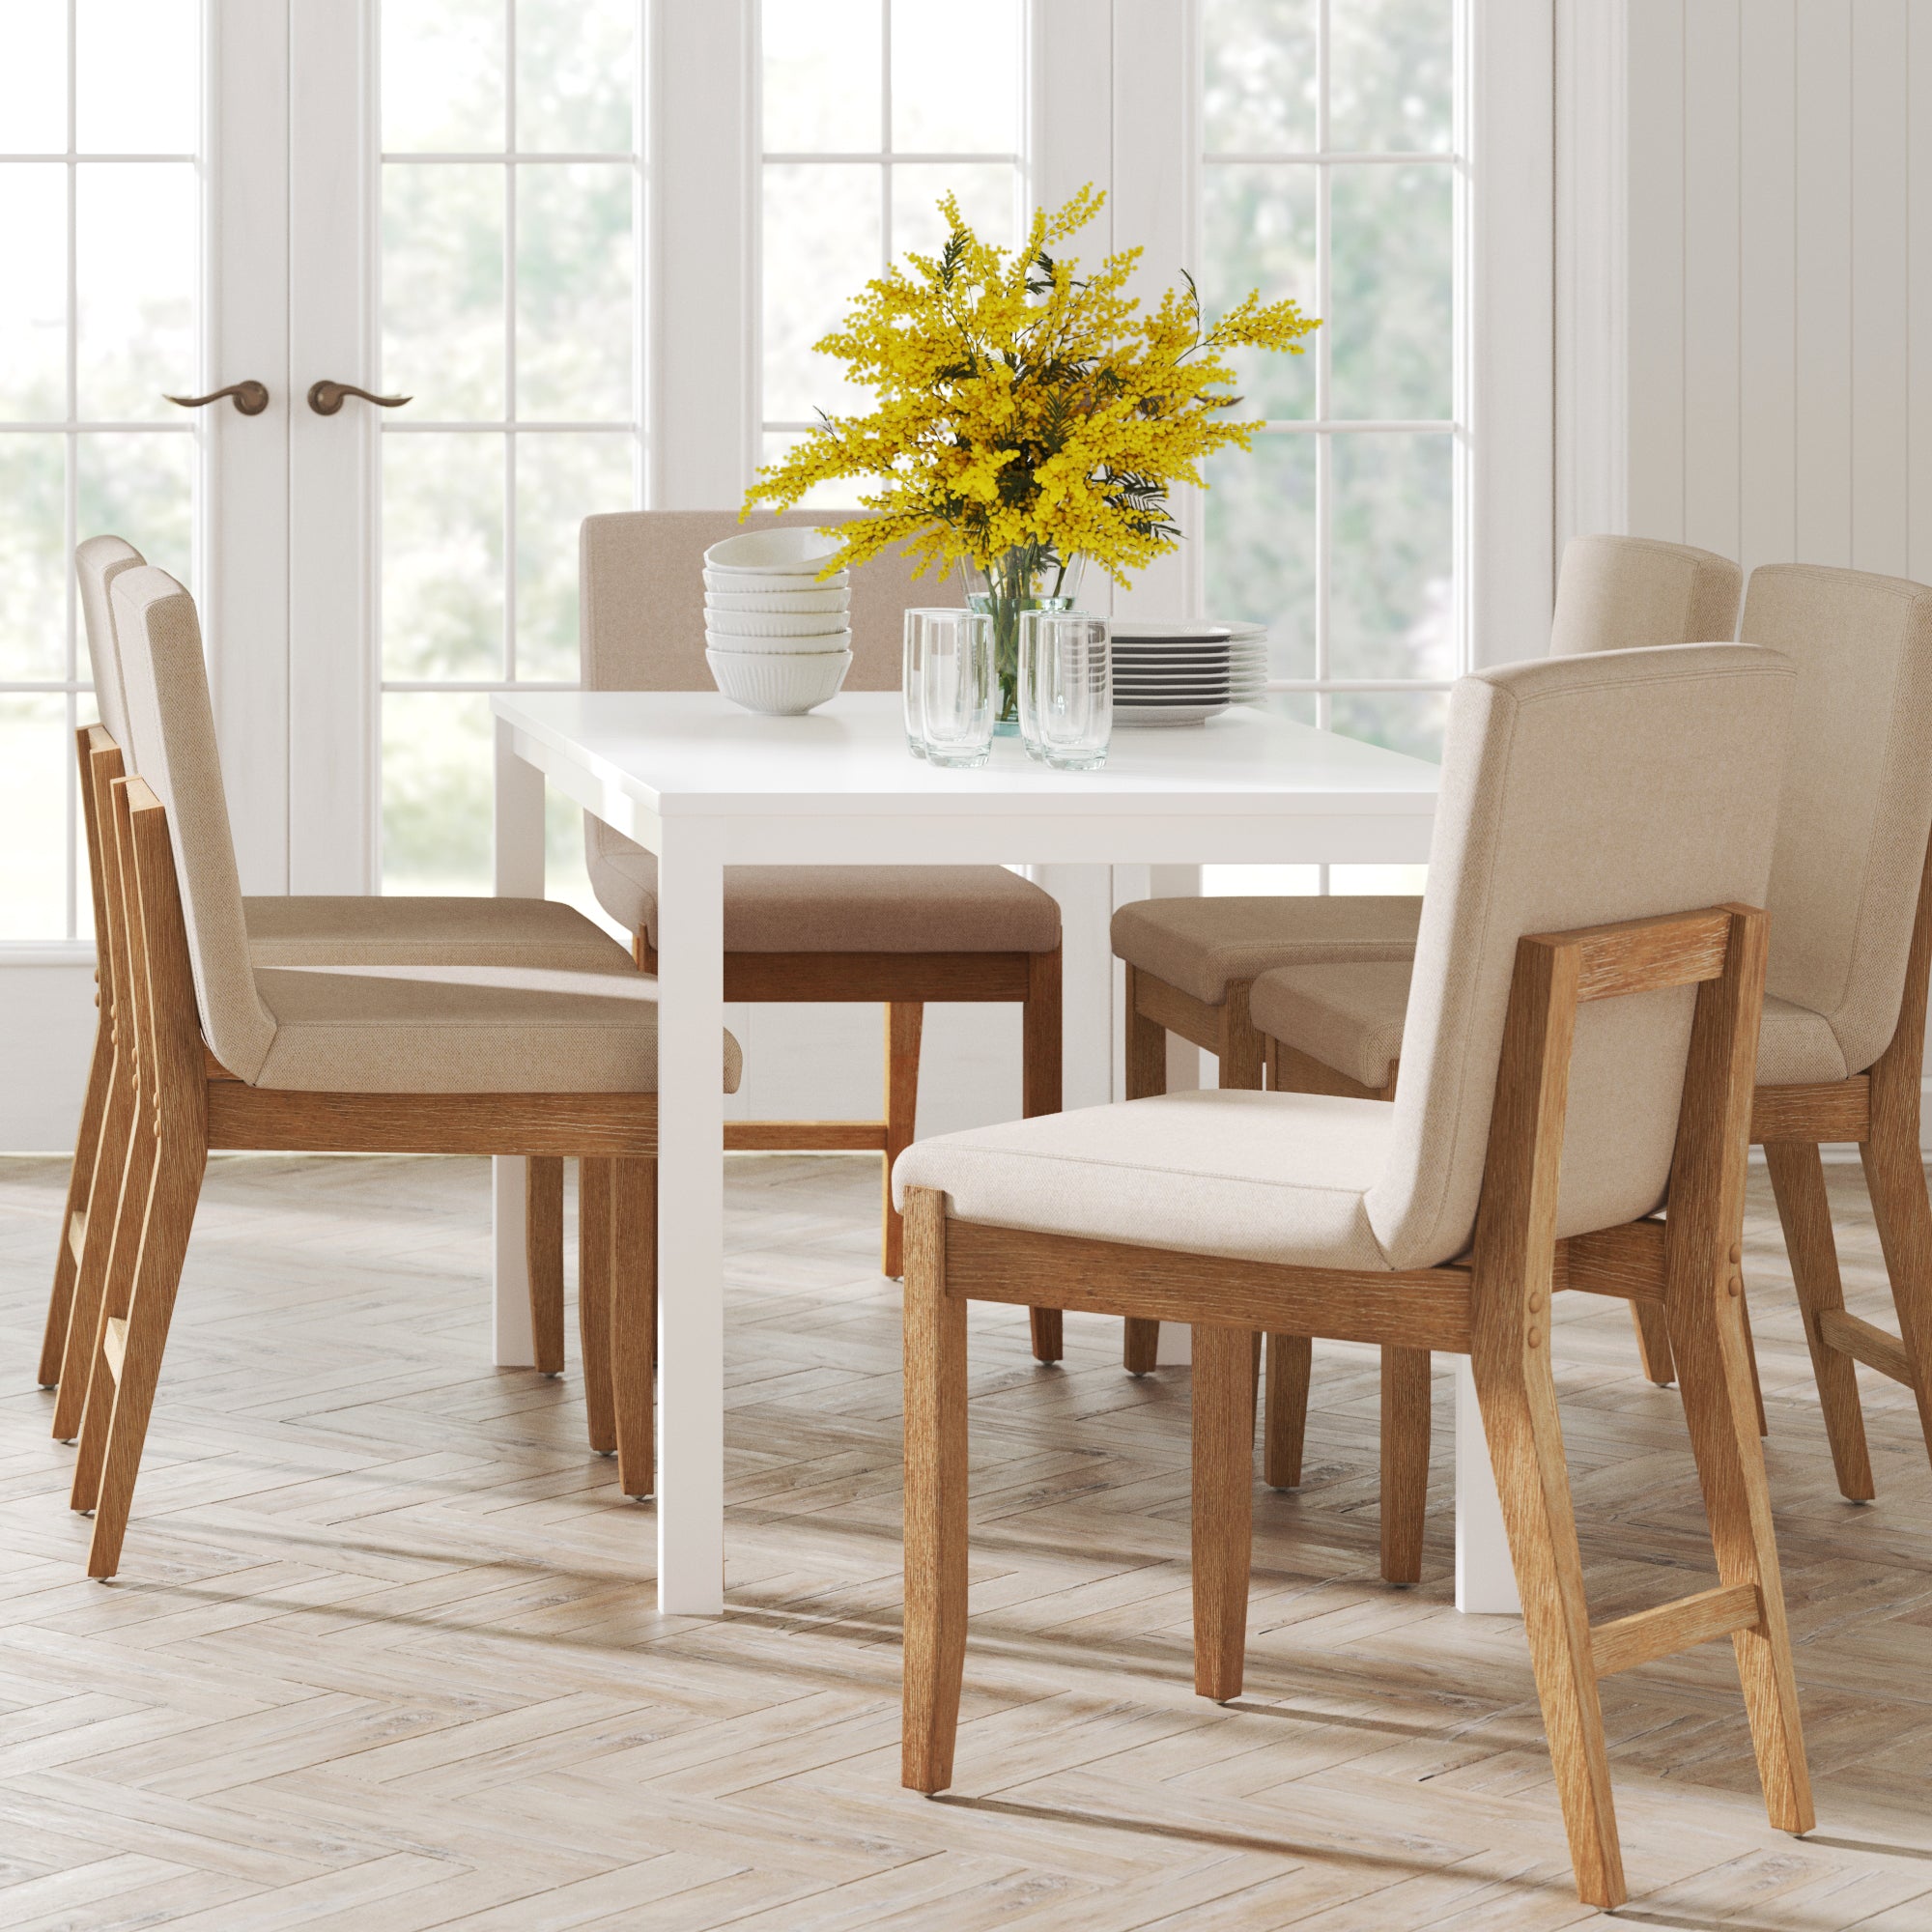 Dining Chairs Light Brown Flax (Set of 6)